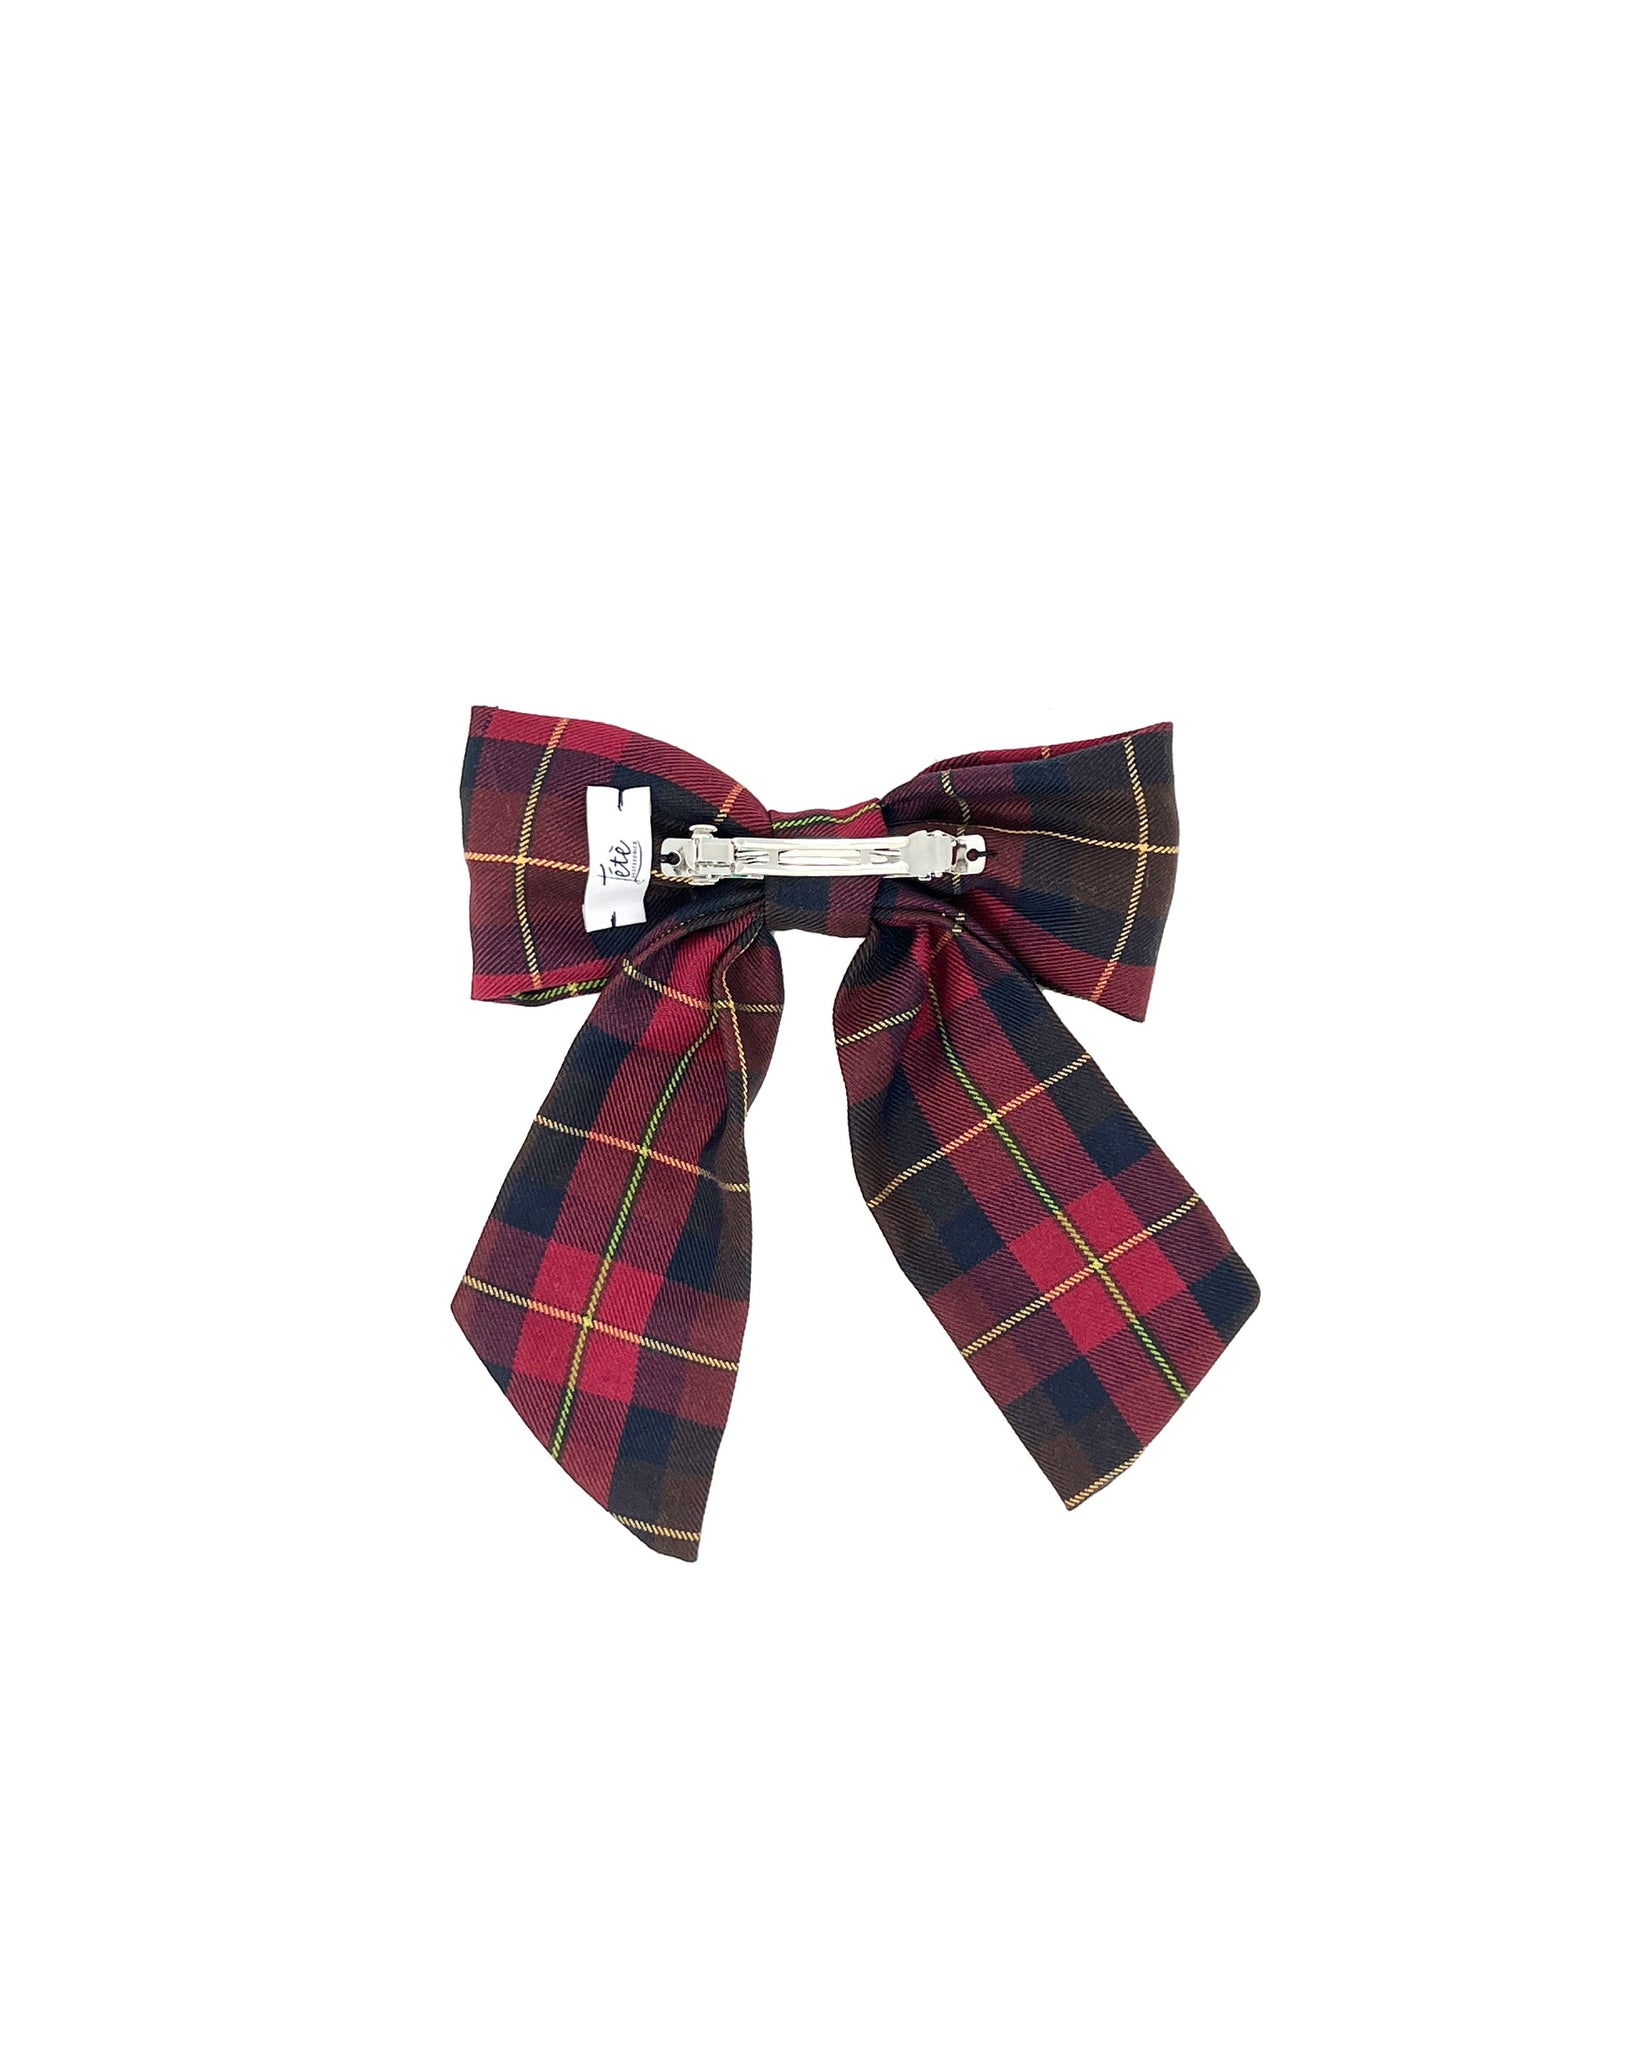 Embroidered burgundy and brown tartan bow barrette